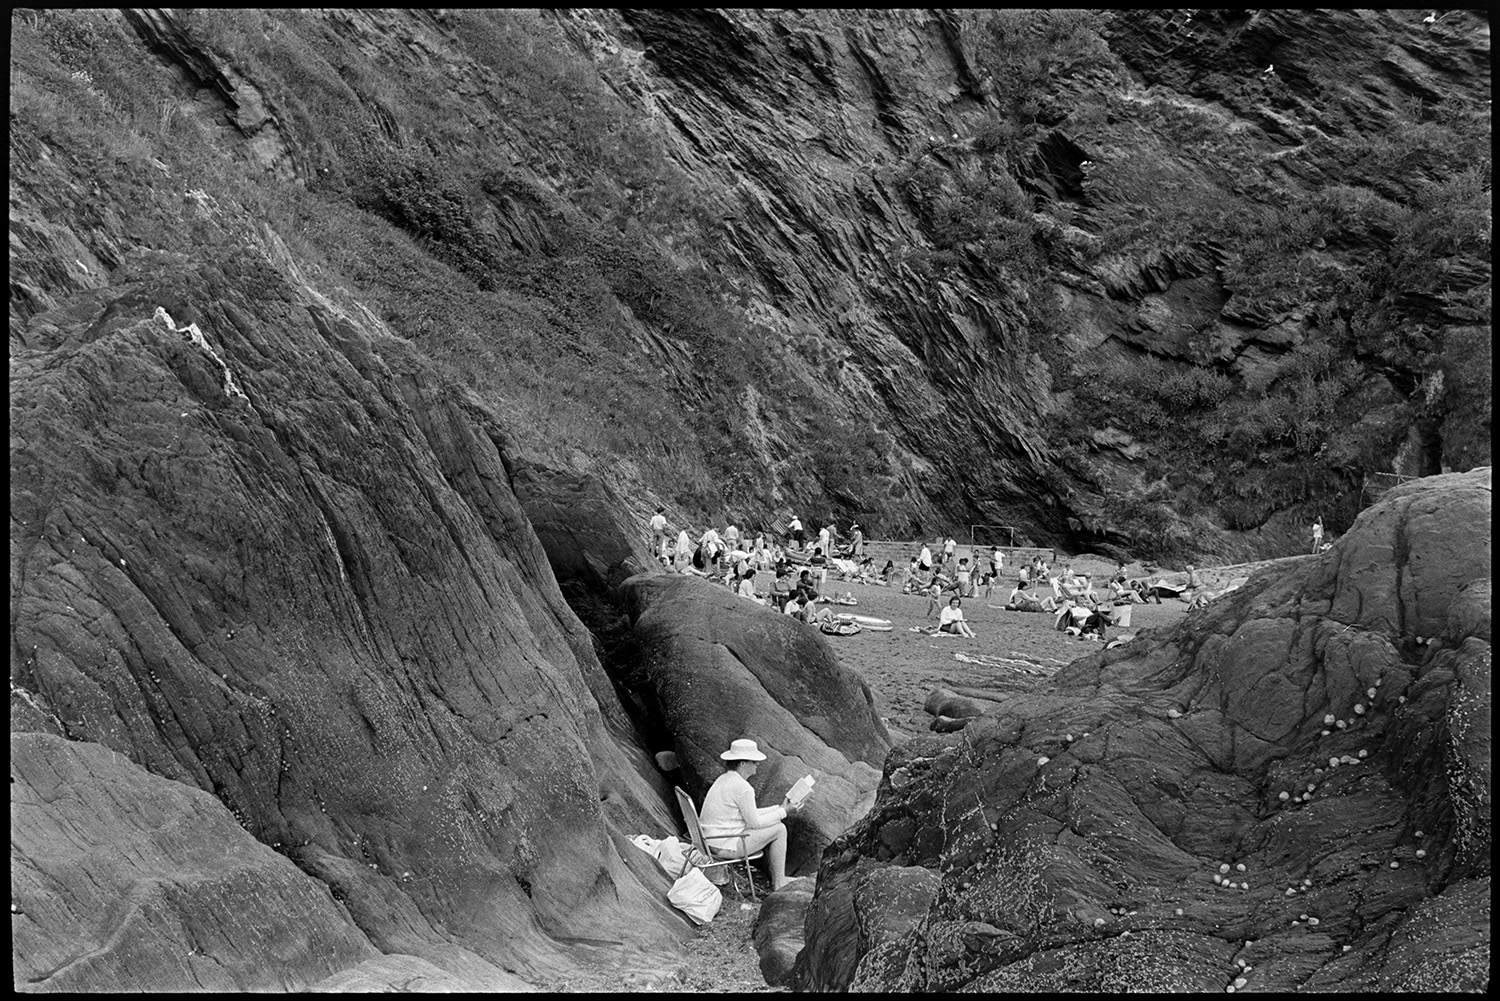 Entrance to tunnel and rocky beach with shop. People climbing on rocks. Boats. 
[People sitting and sun bathing on the beach at Ilfracombe, with cliffs in the background. A person is sat on a garden chair reading a book, at the bottom of the cliff in the foreground.]